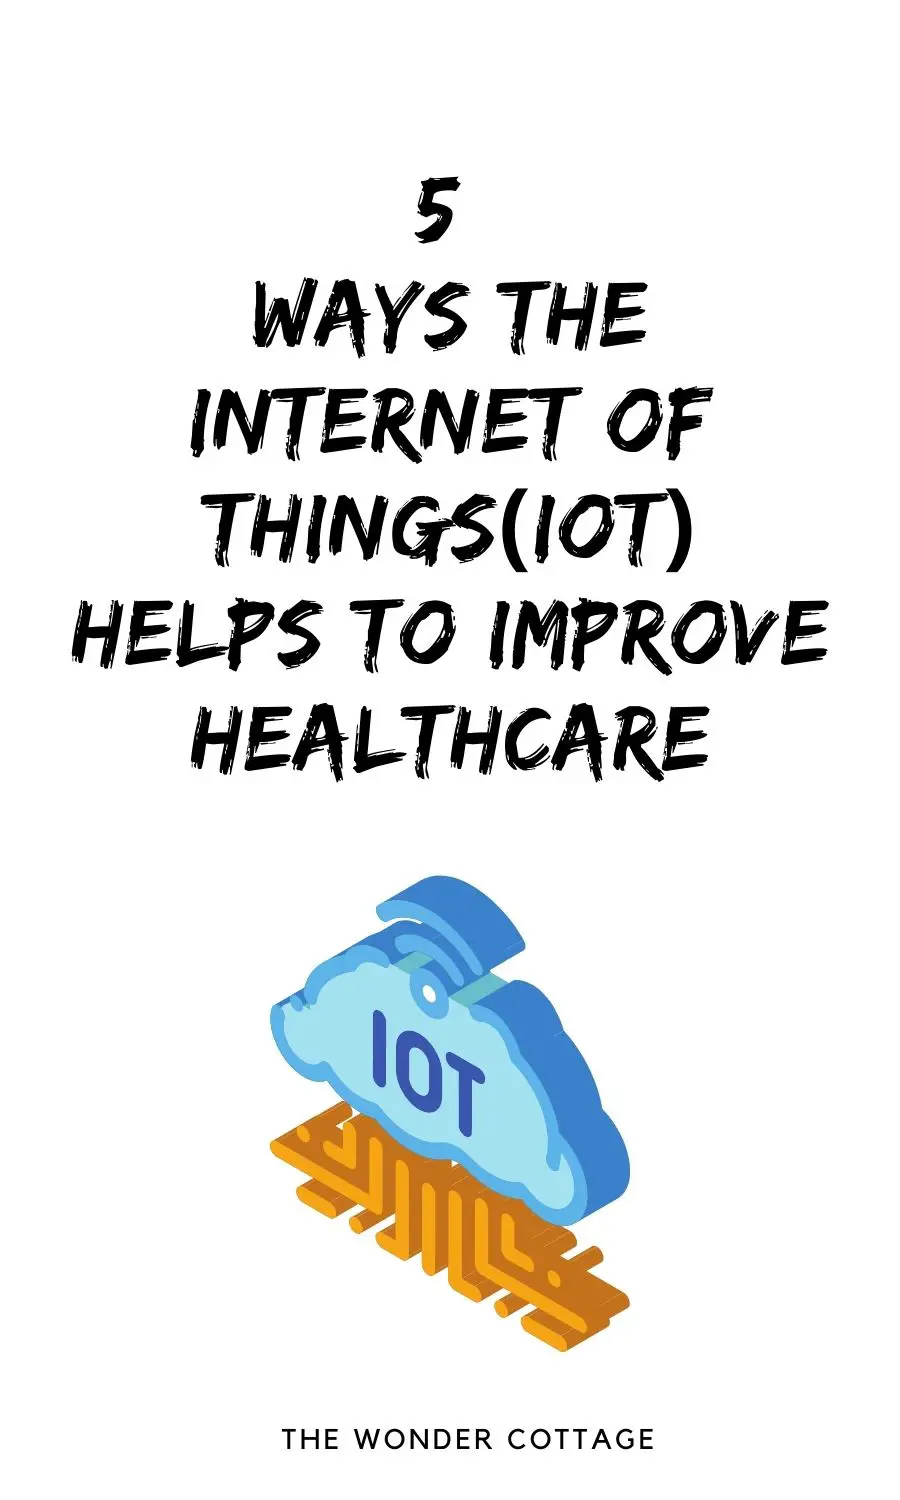 5 ways the internet of things(IoT) helps to improve healthcare